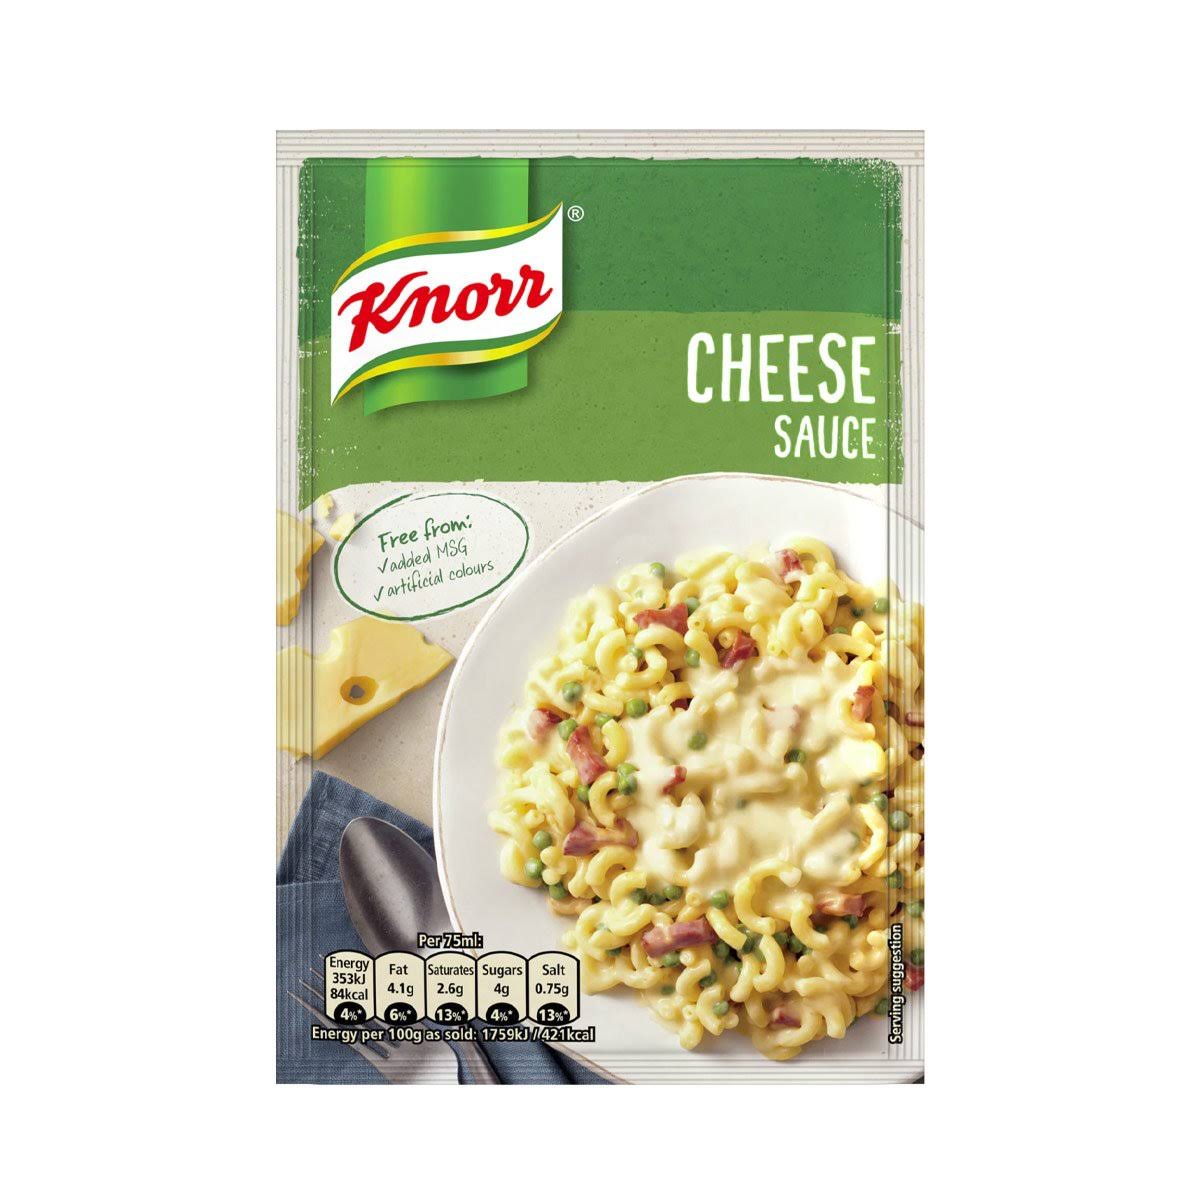 Knorr Cheese Sauce Mix (5 x 33G Packets)